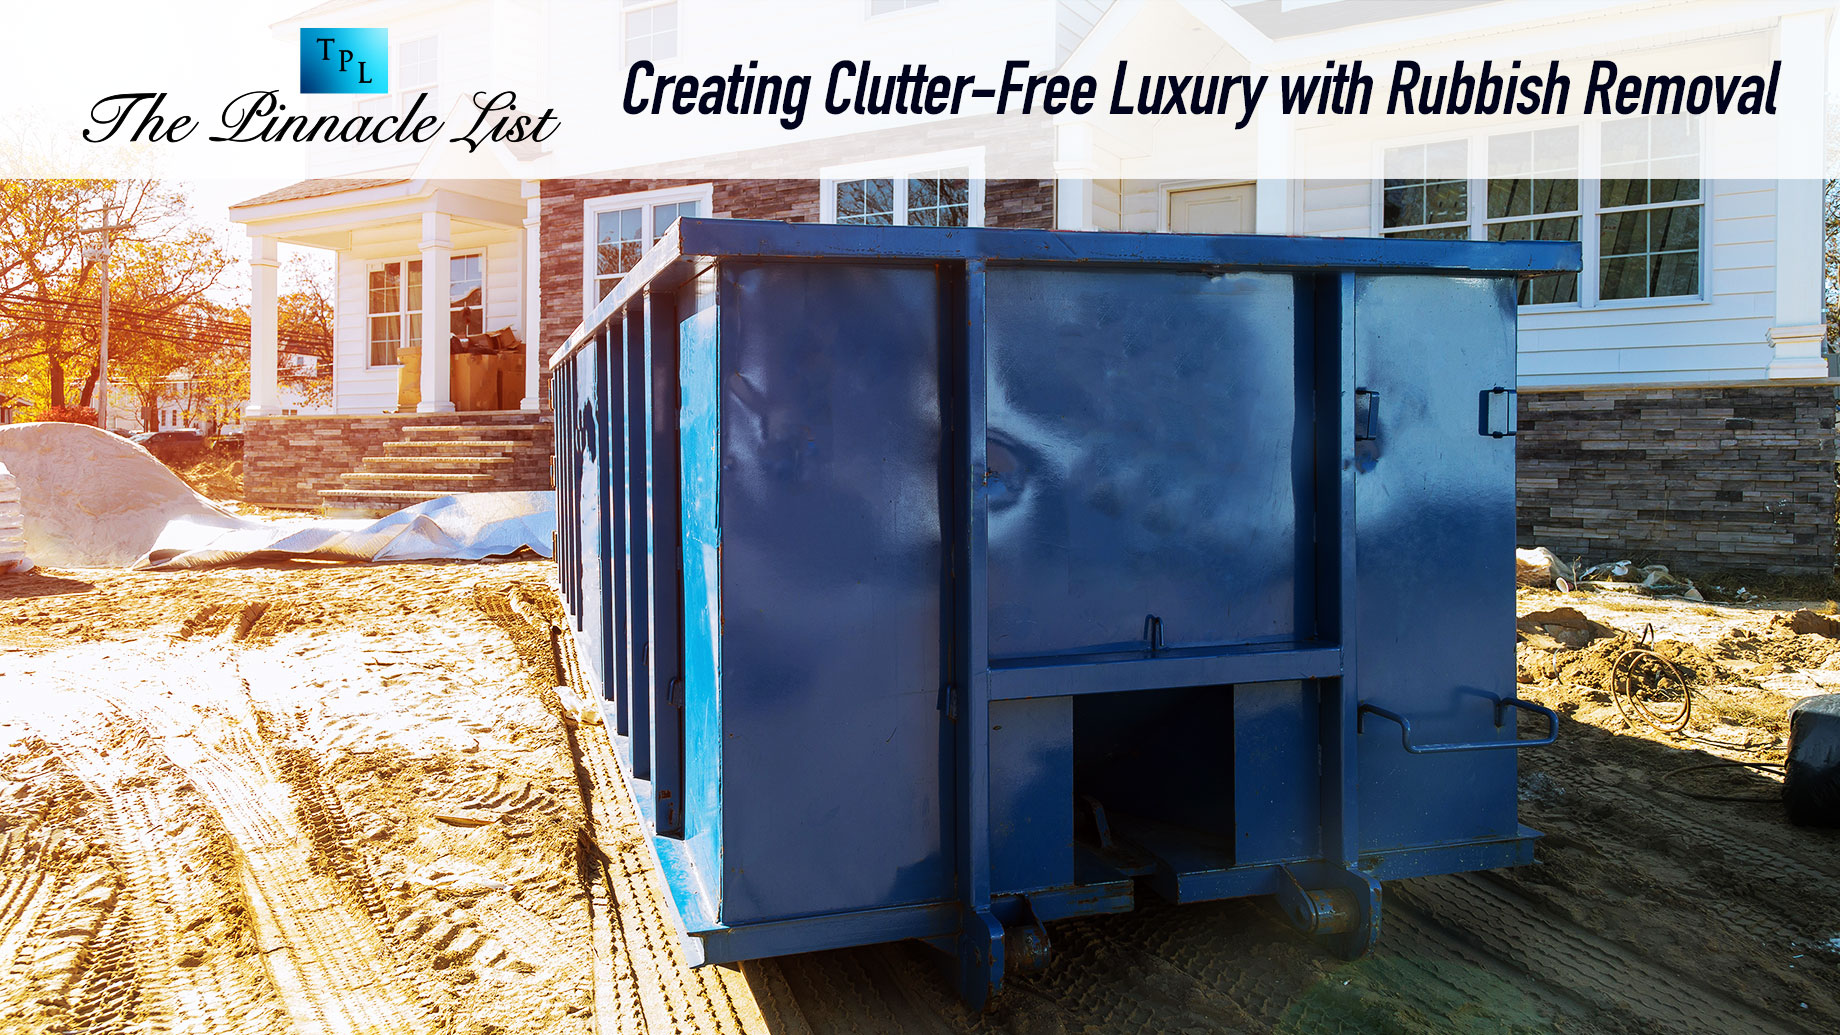 Creating Clutter-Free Luxury with Rubbish Removal